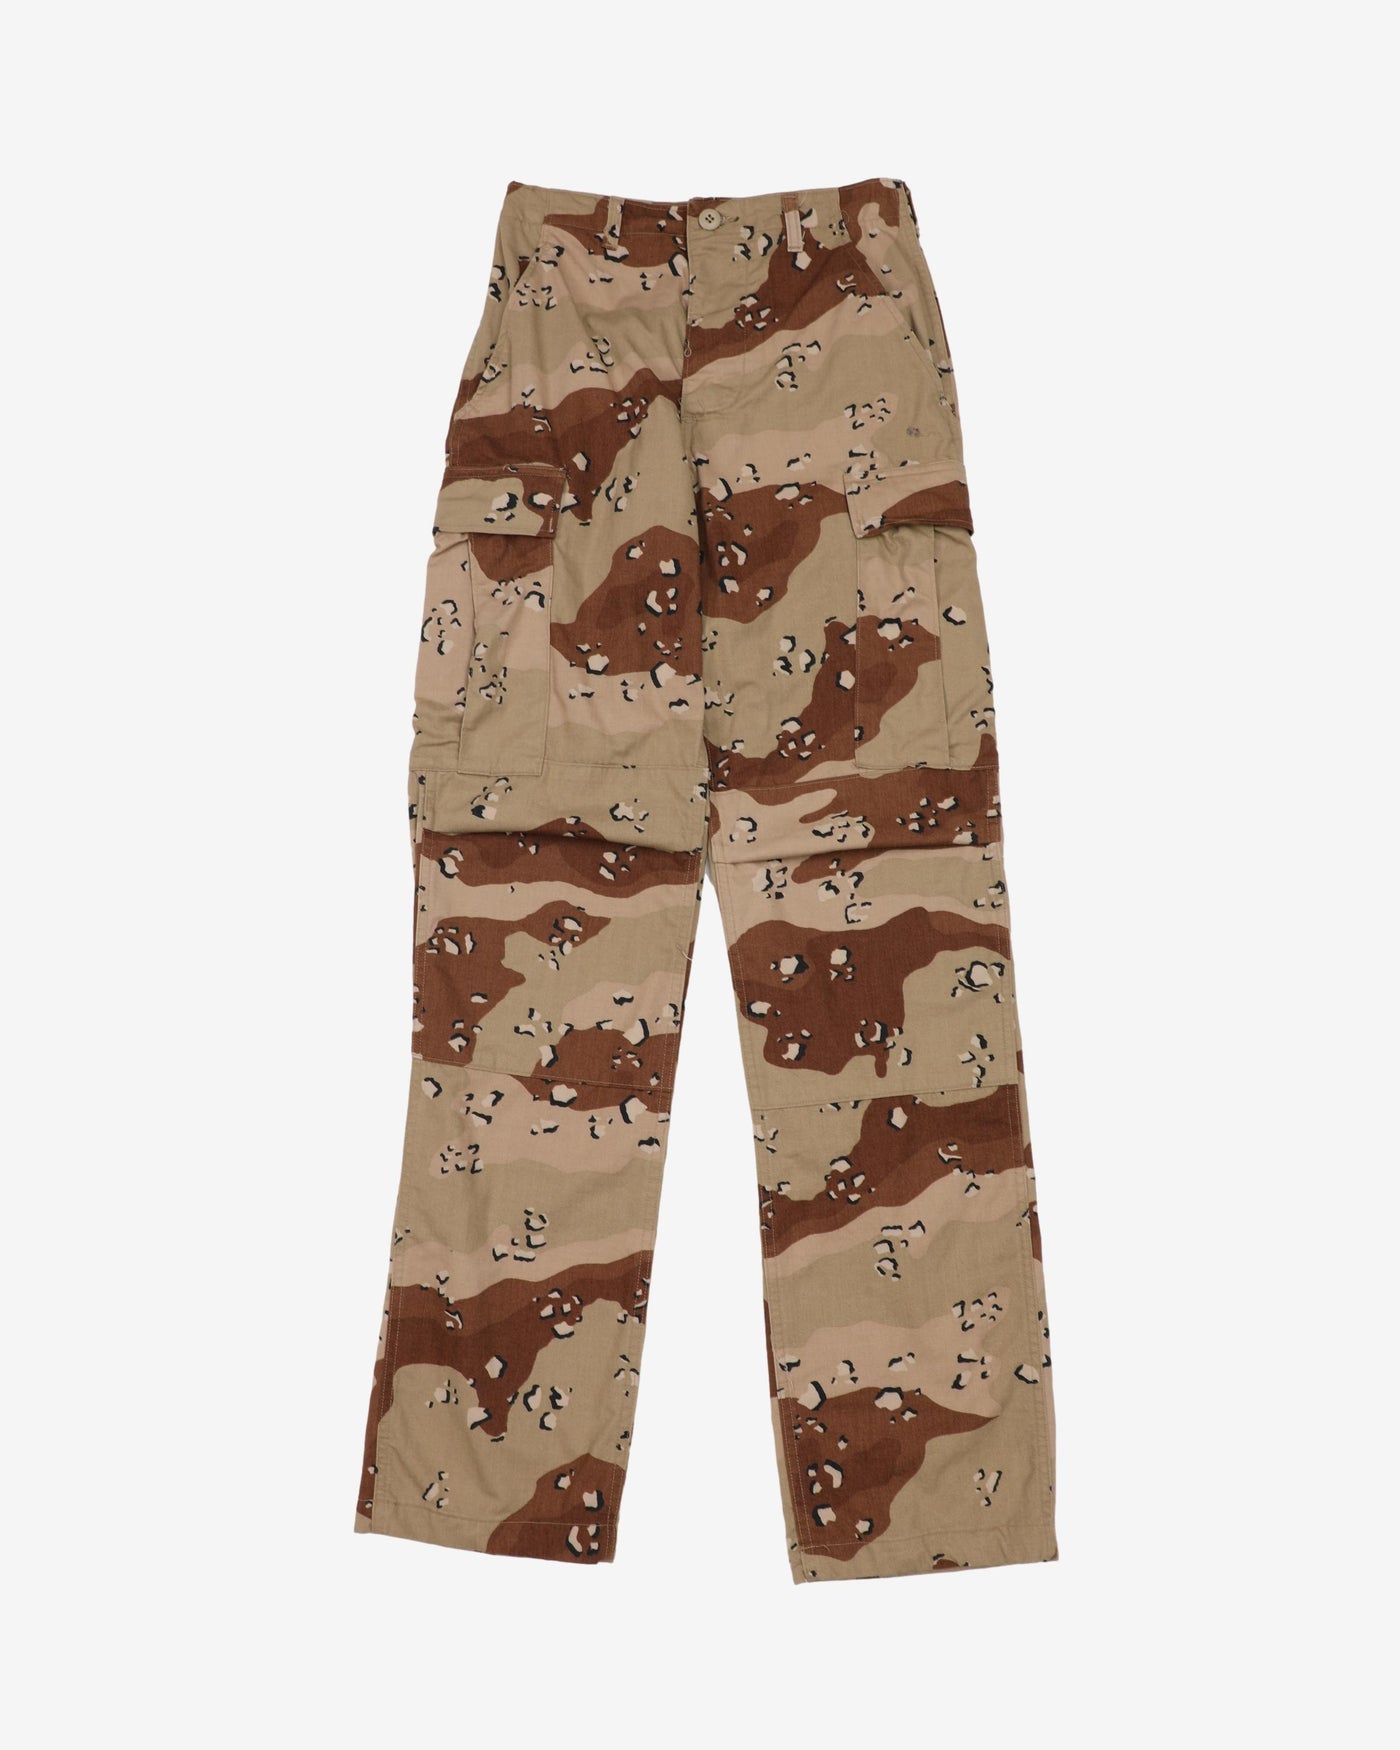 1990s Vintage US Army Desert Camo Chocolate Chip Trousers - 28x34